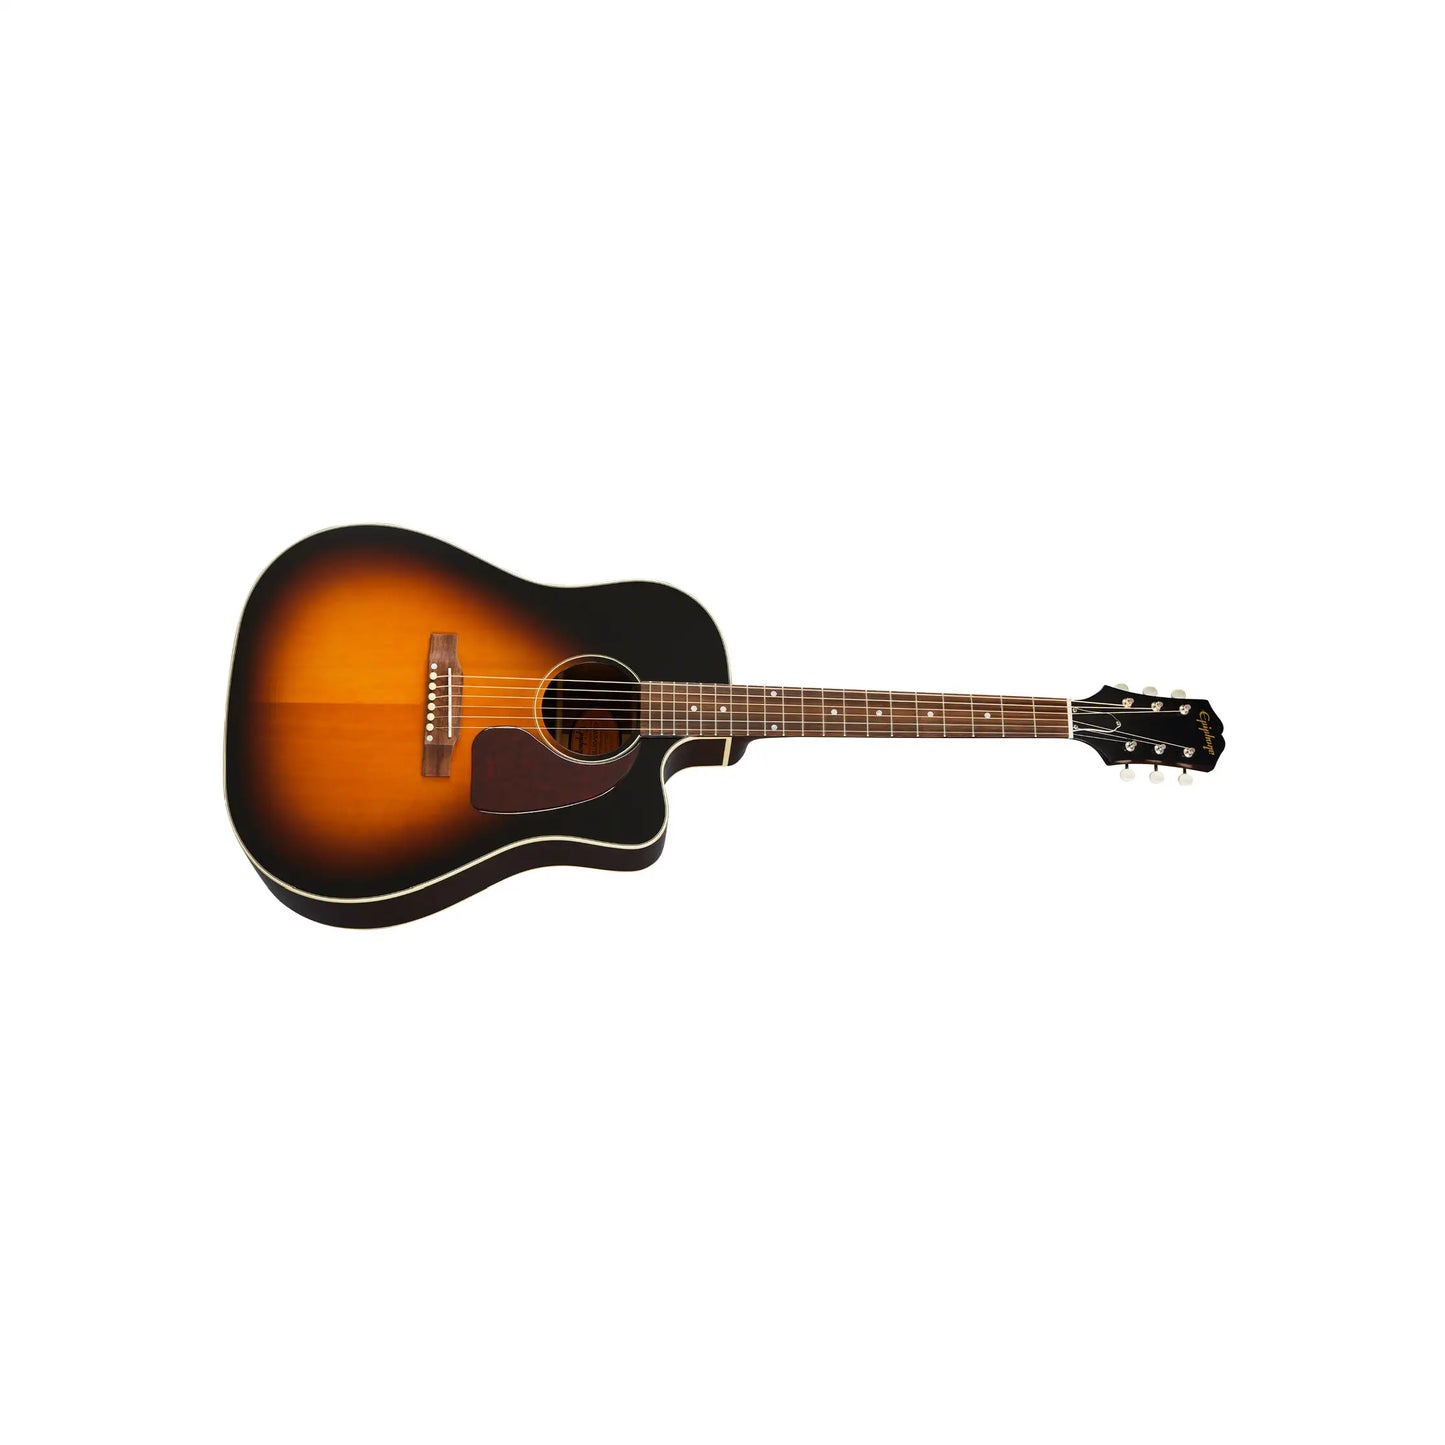 EPIPHONE INSPIRED BY GIBSON J-45 EC AGED VINTAGE SUNBURST - ALL SOLID J45 CUTAWAY ELECTRIC ACOUSTIC GUITAR